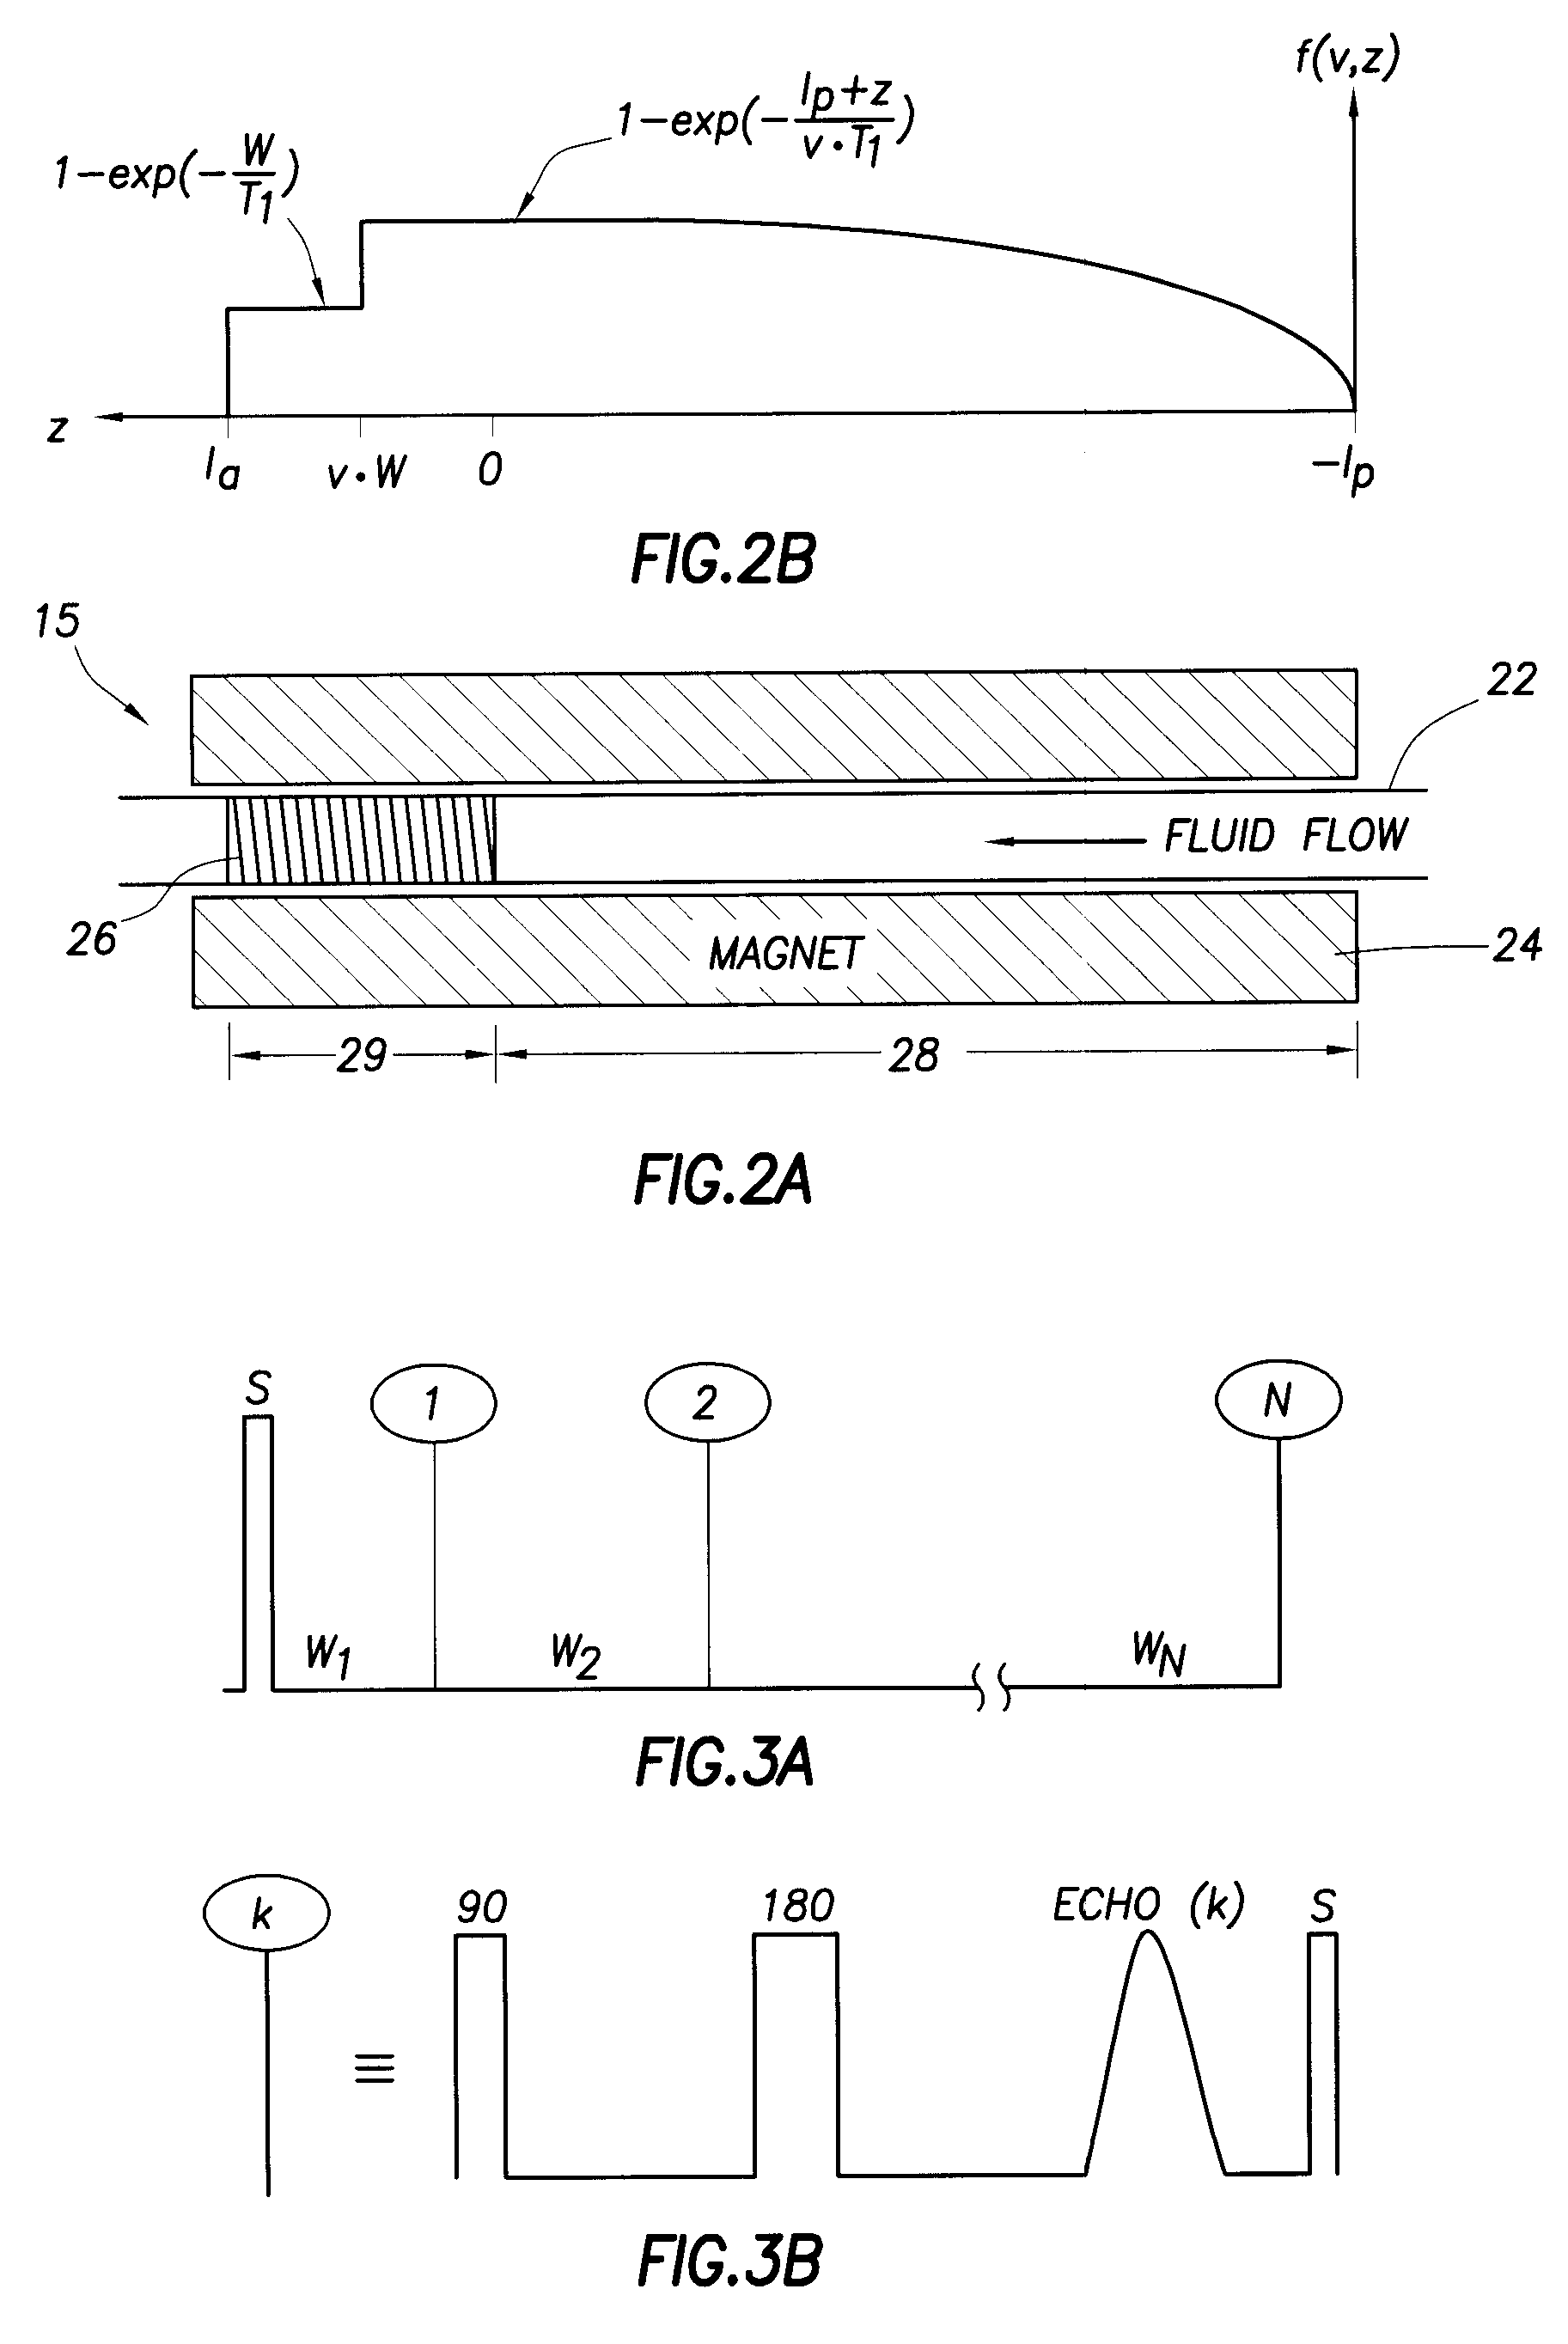 [method and apparatus for determining speed and properties of flowing fluids using nmr measurements]